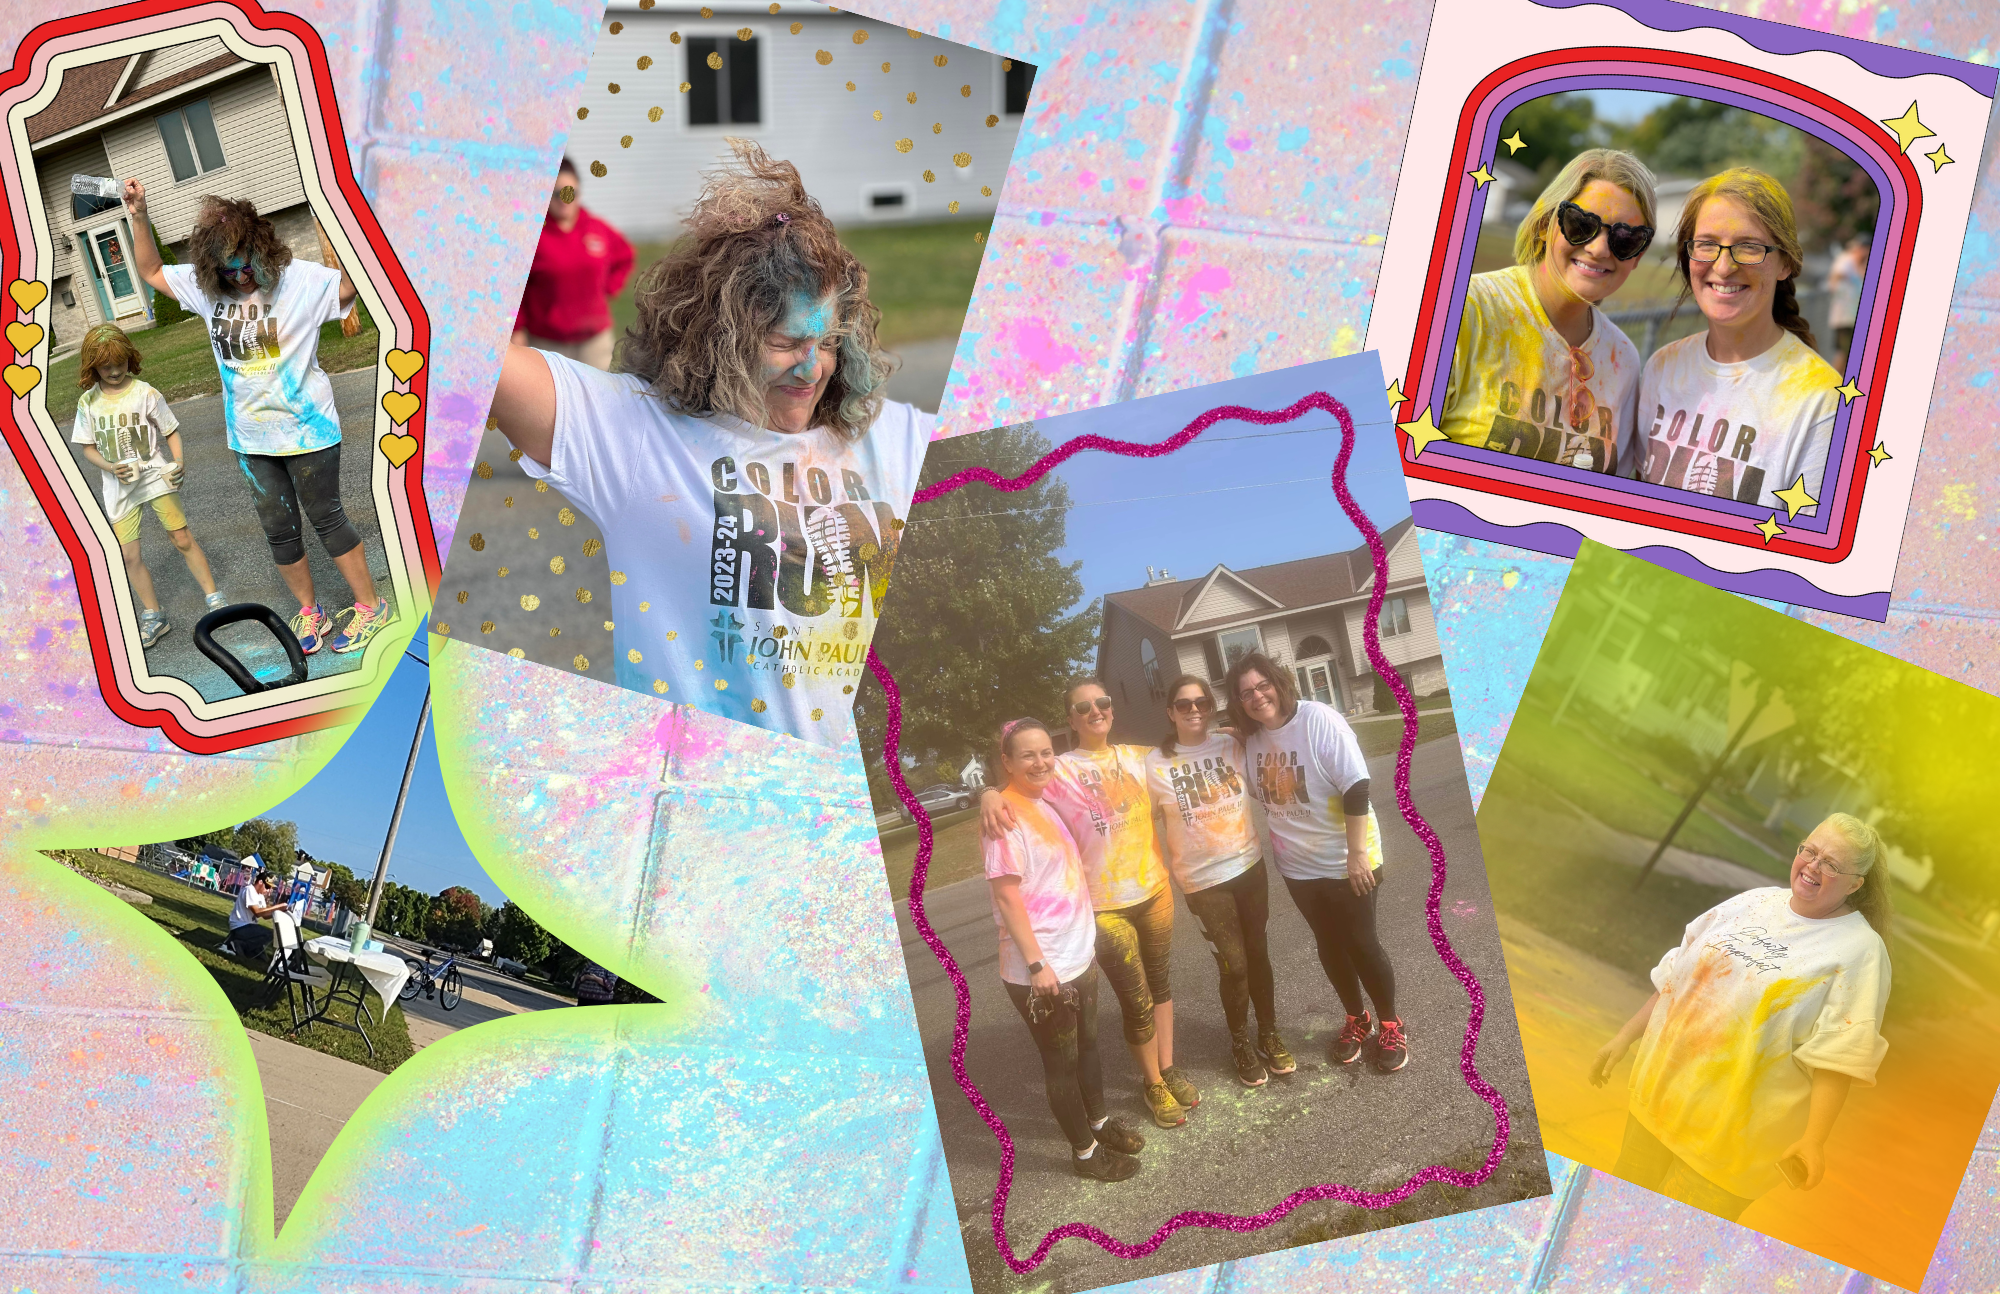 color run 7.png